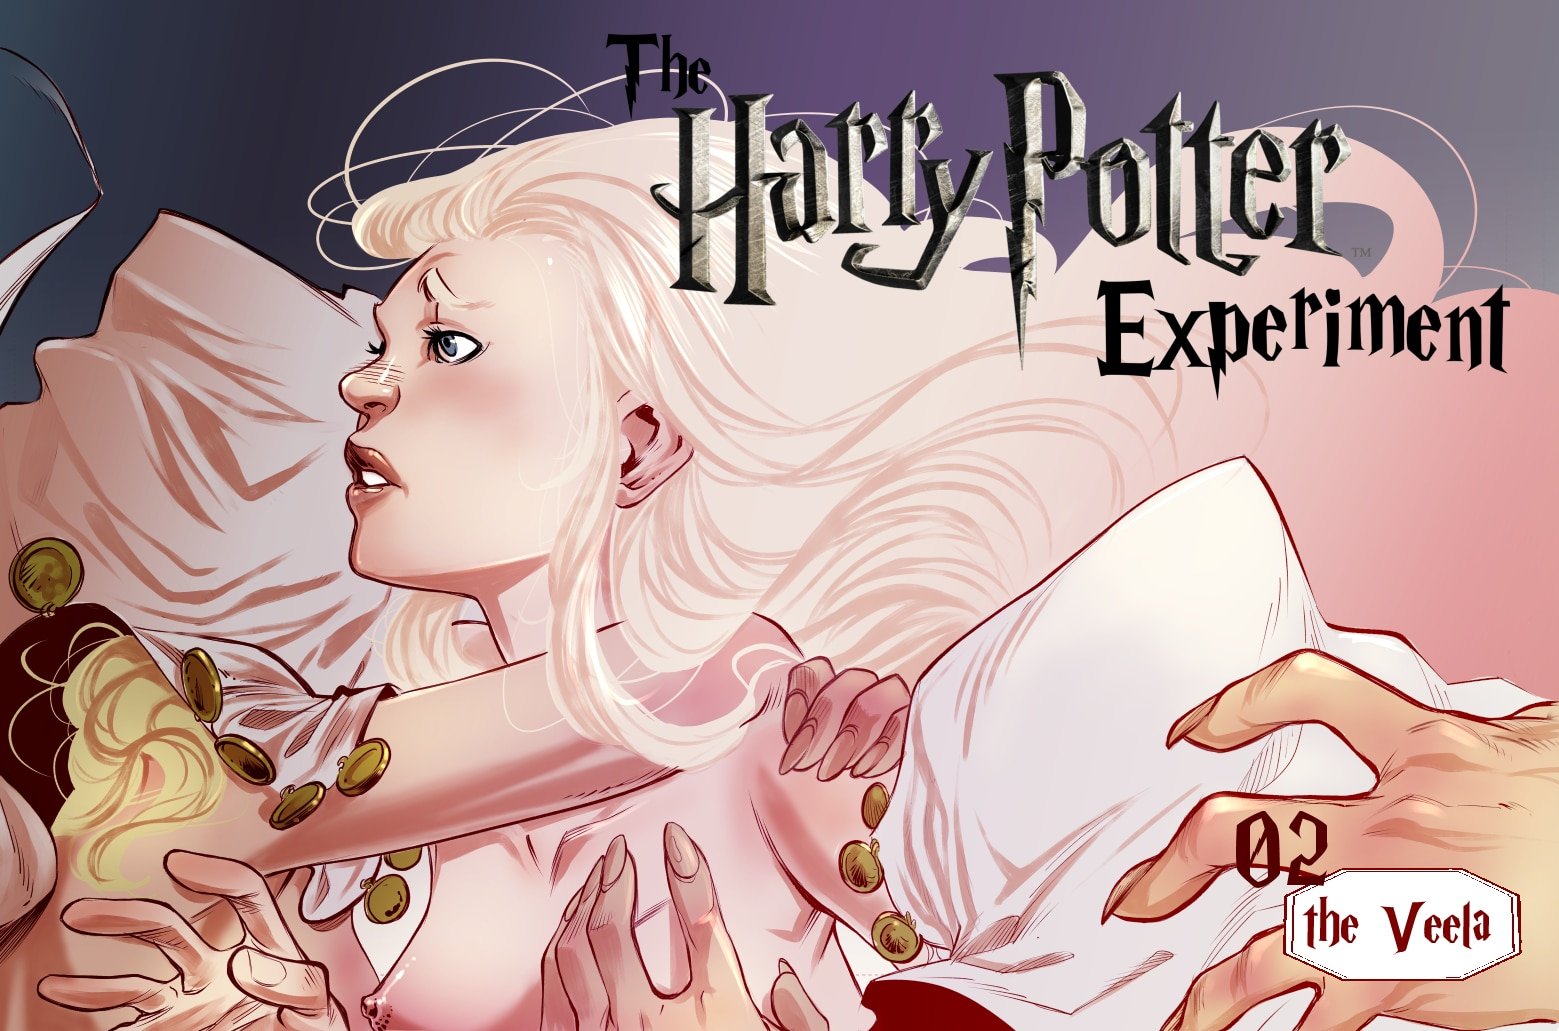 The Harry Potter Experiment 2 – The Veela - 0